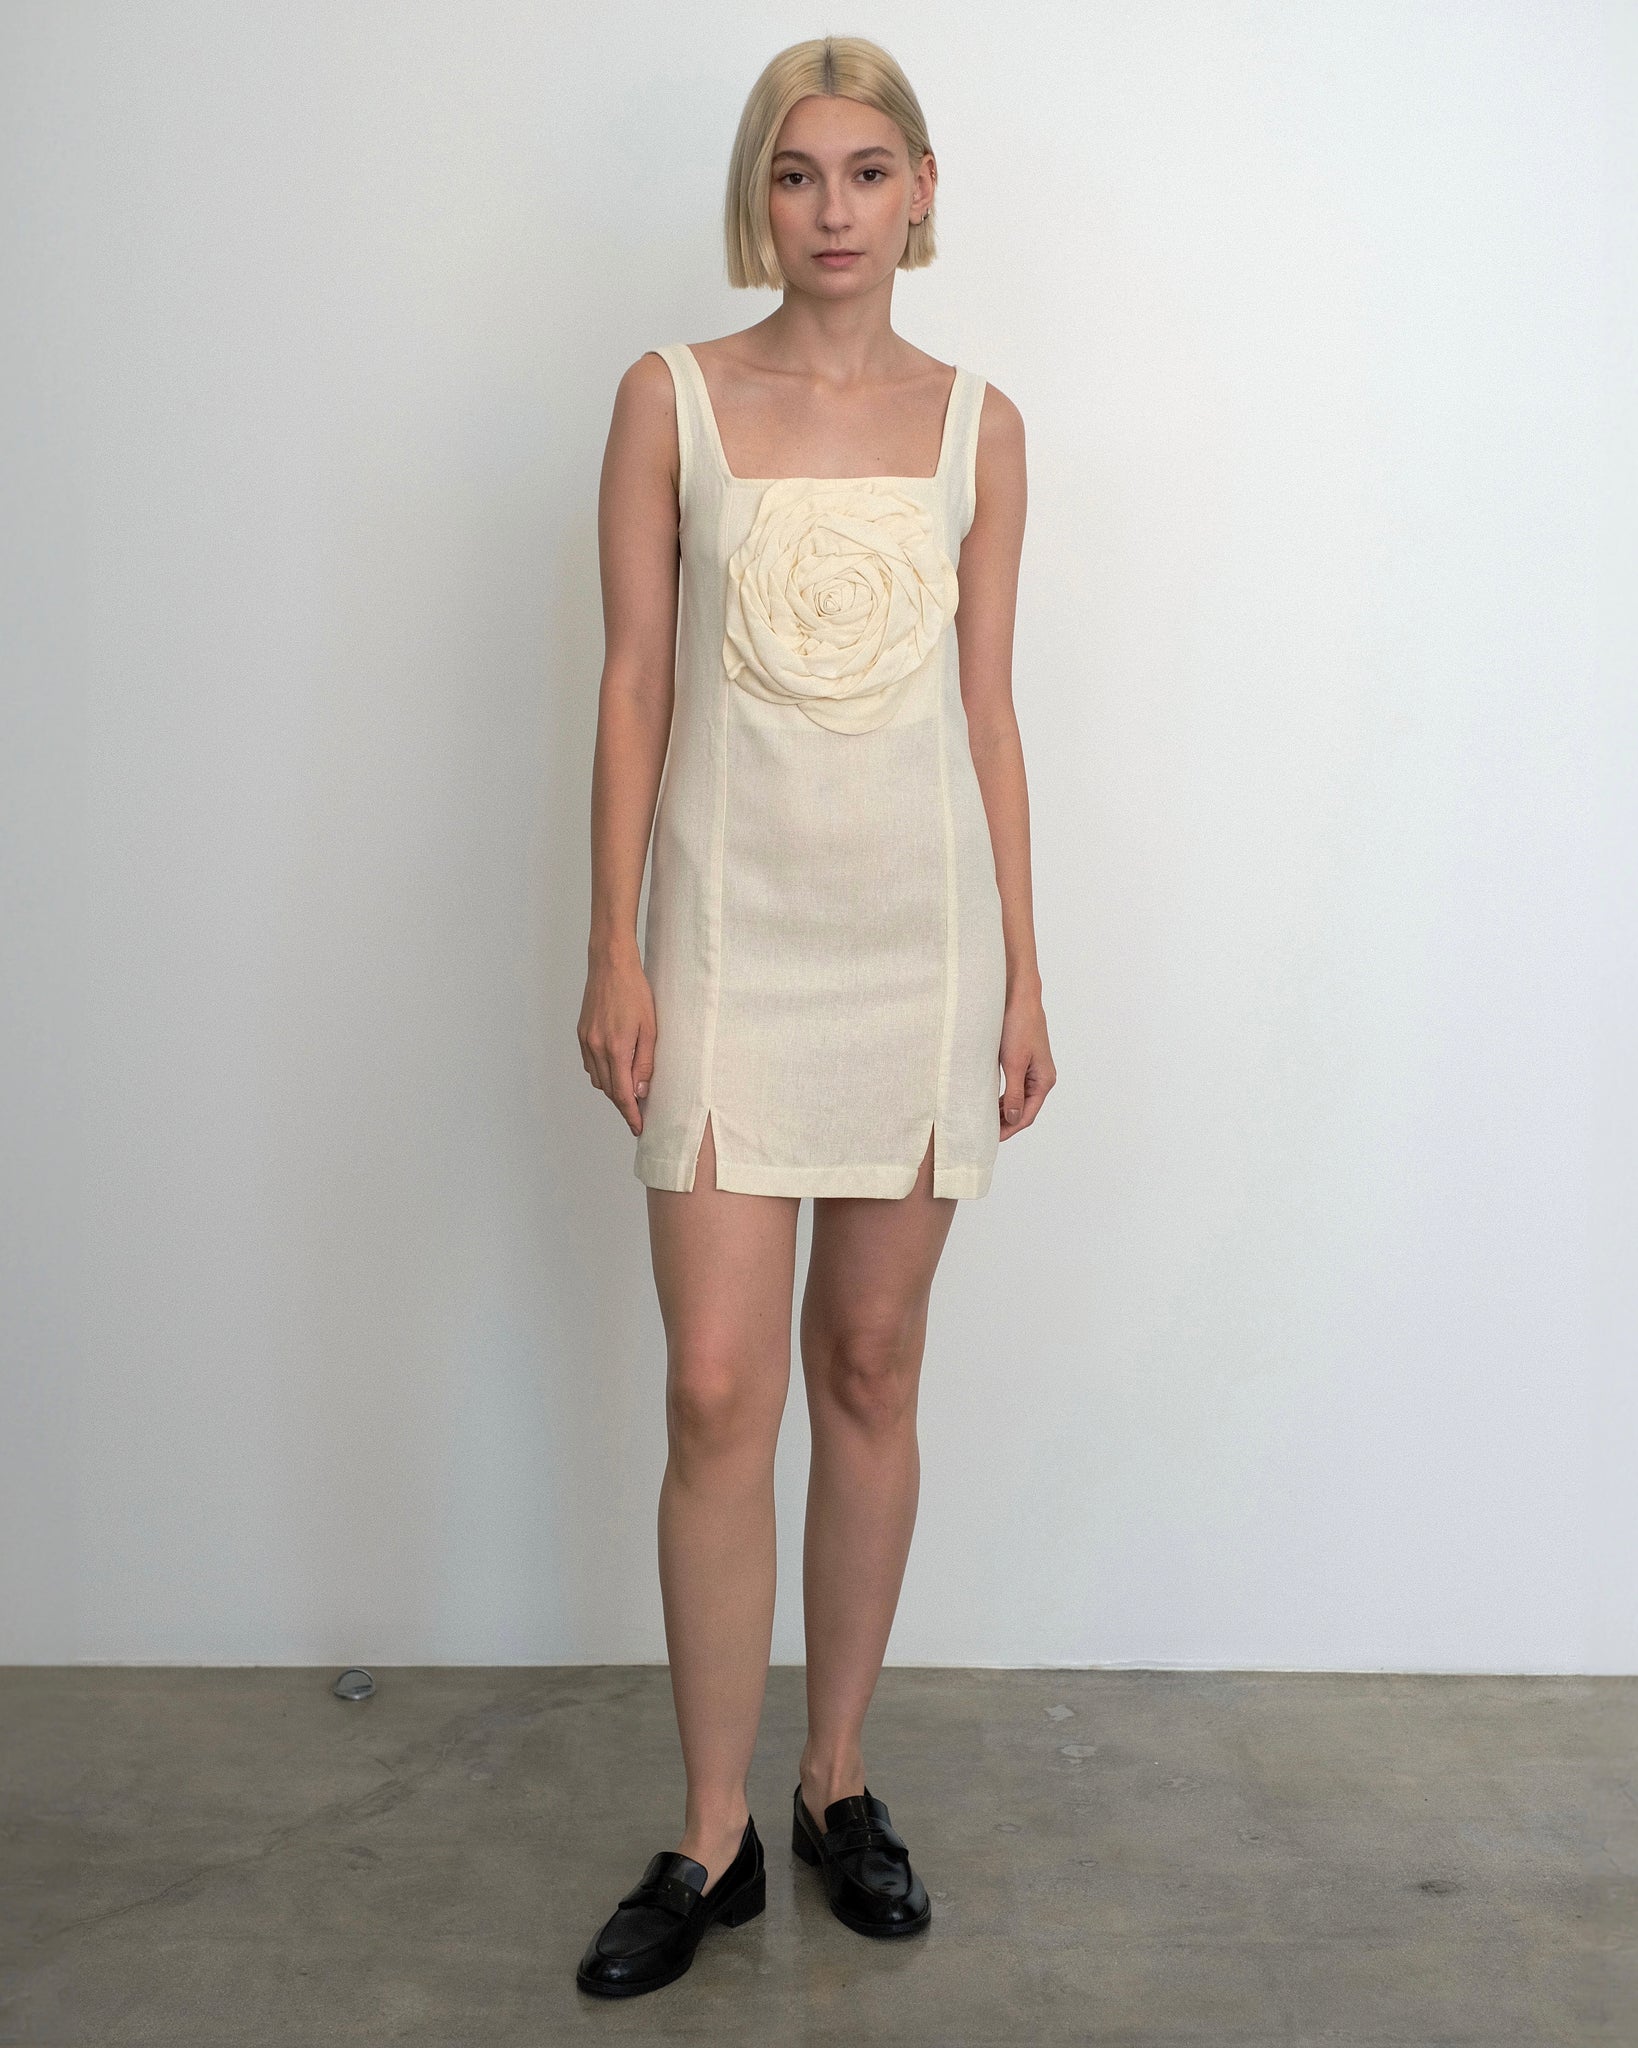 Model wearing the Marina Dress in ivory linen from Tach